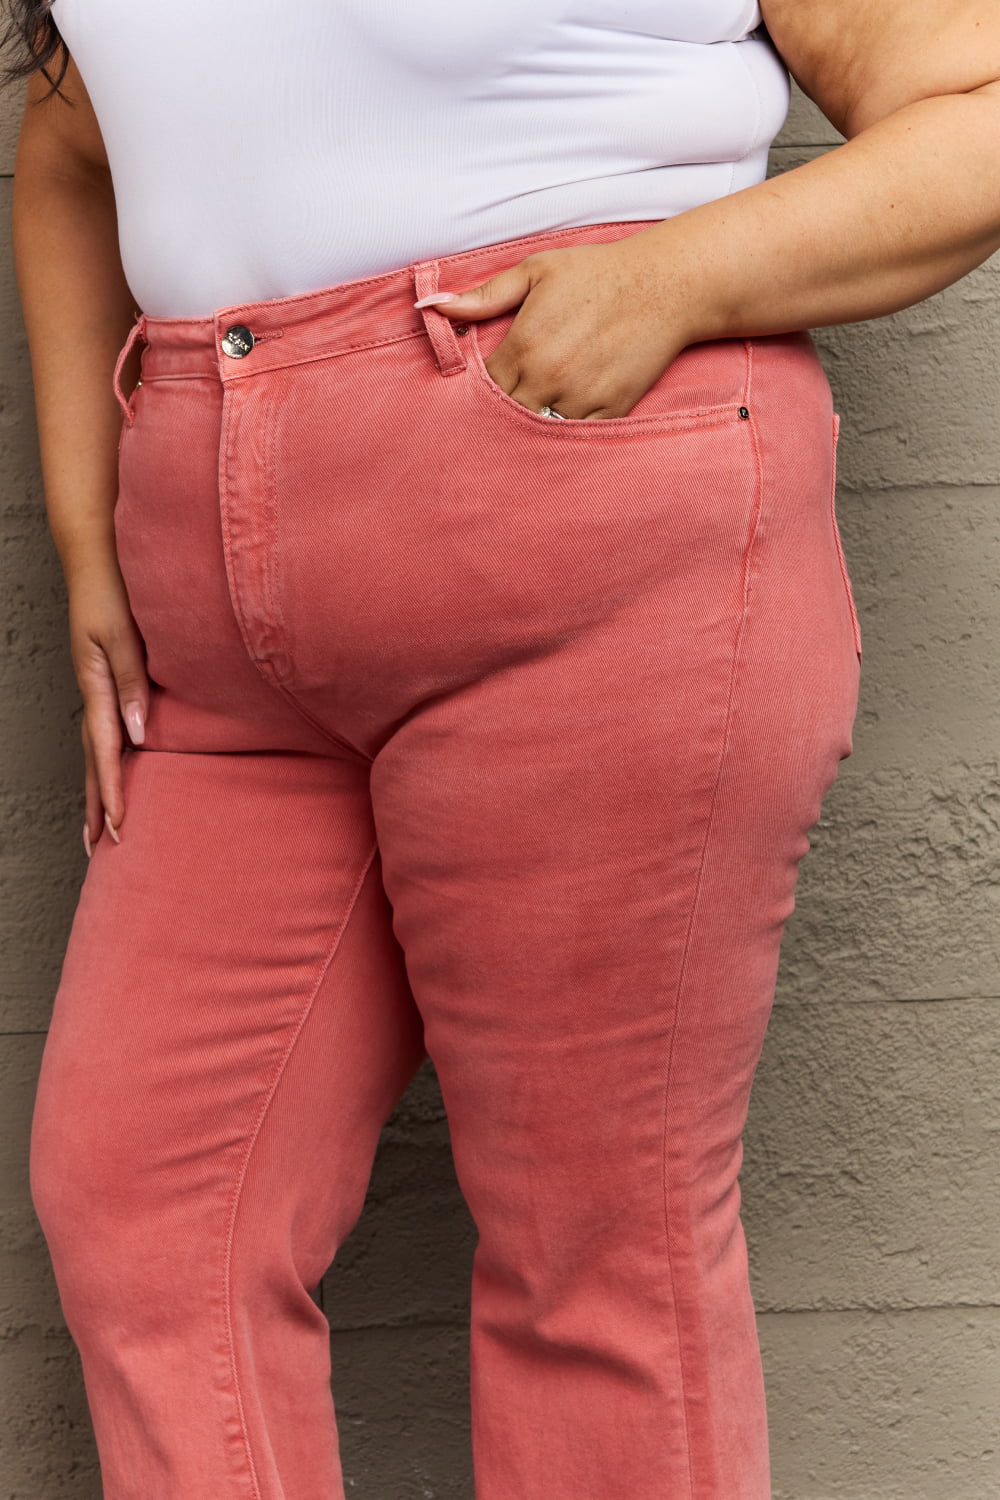 High Waist Side Slit Flare Jeans in Coral Color - Tigbul's Fashion